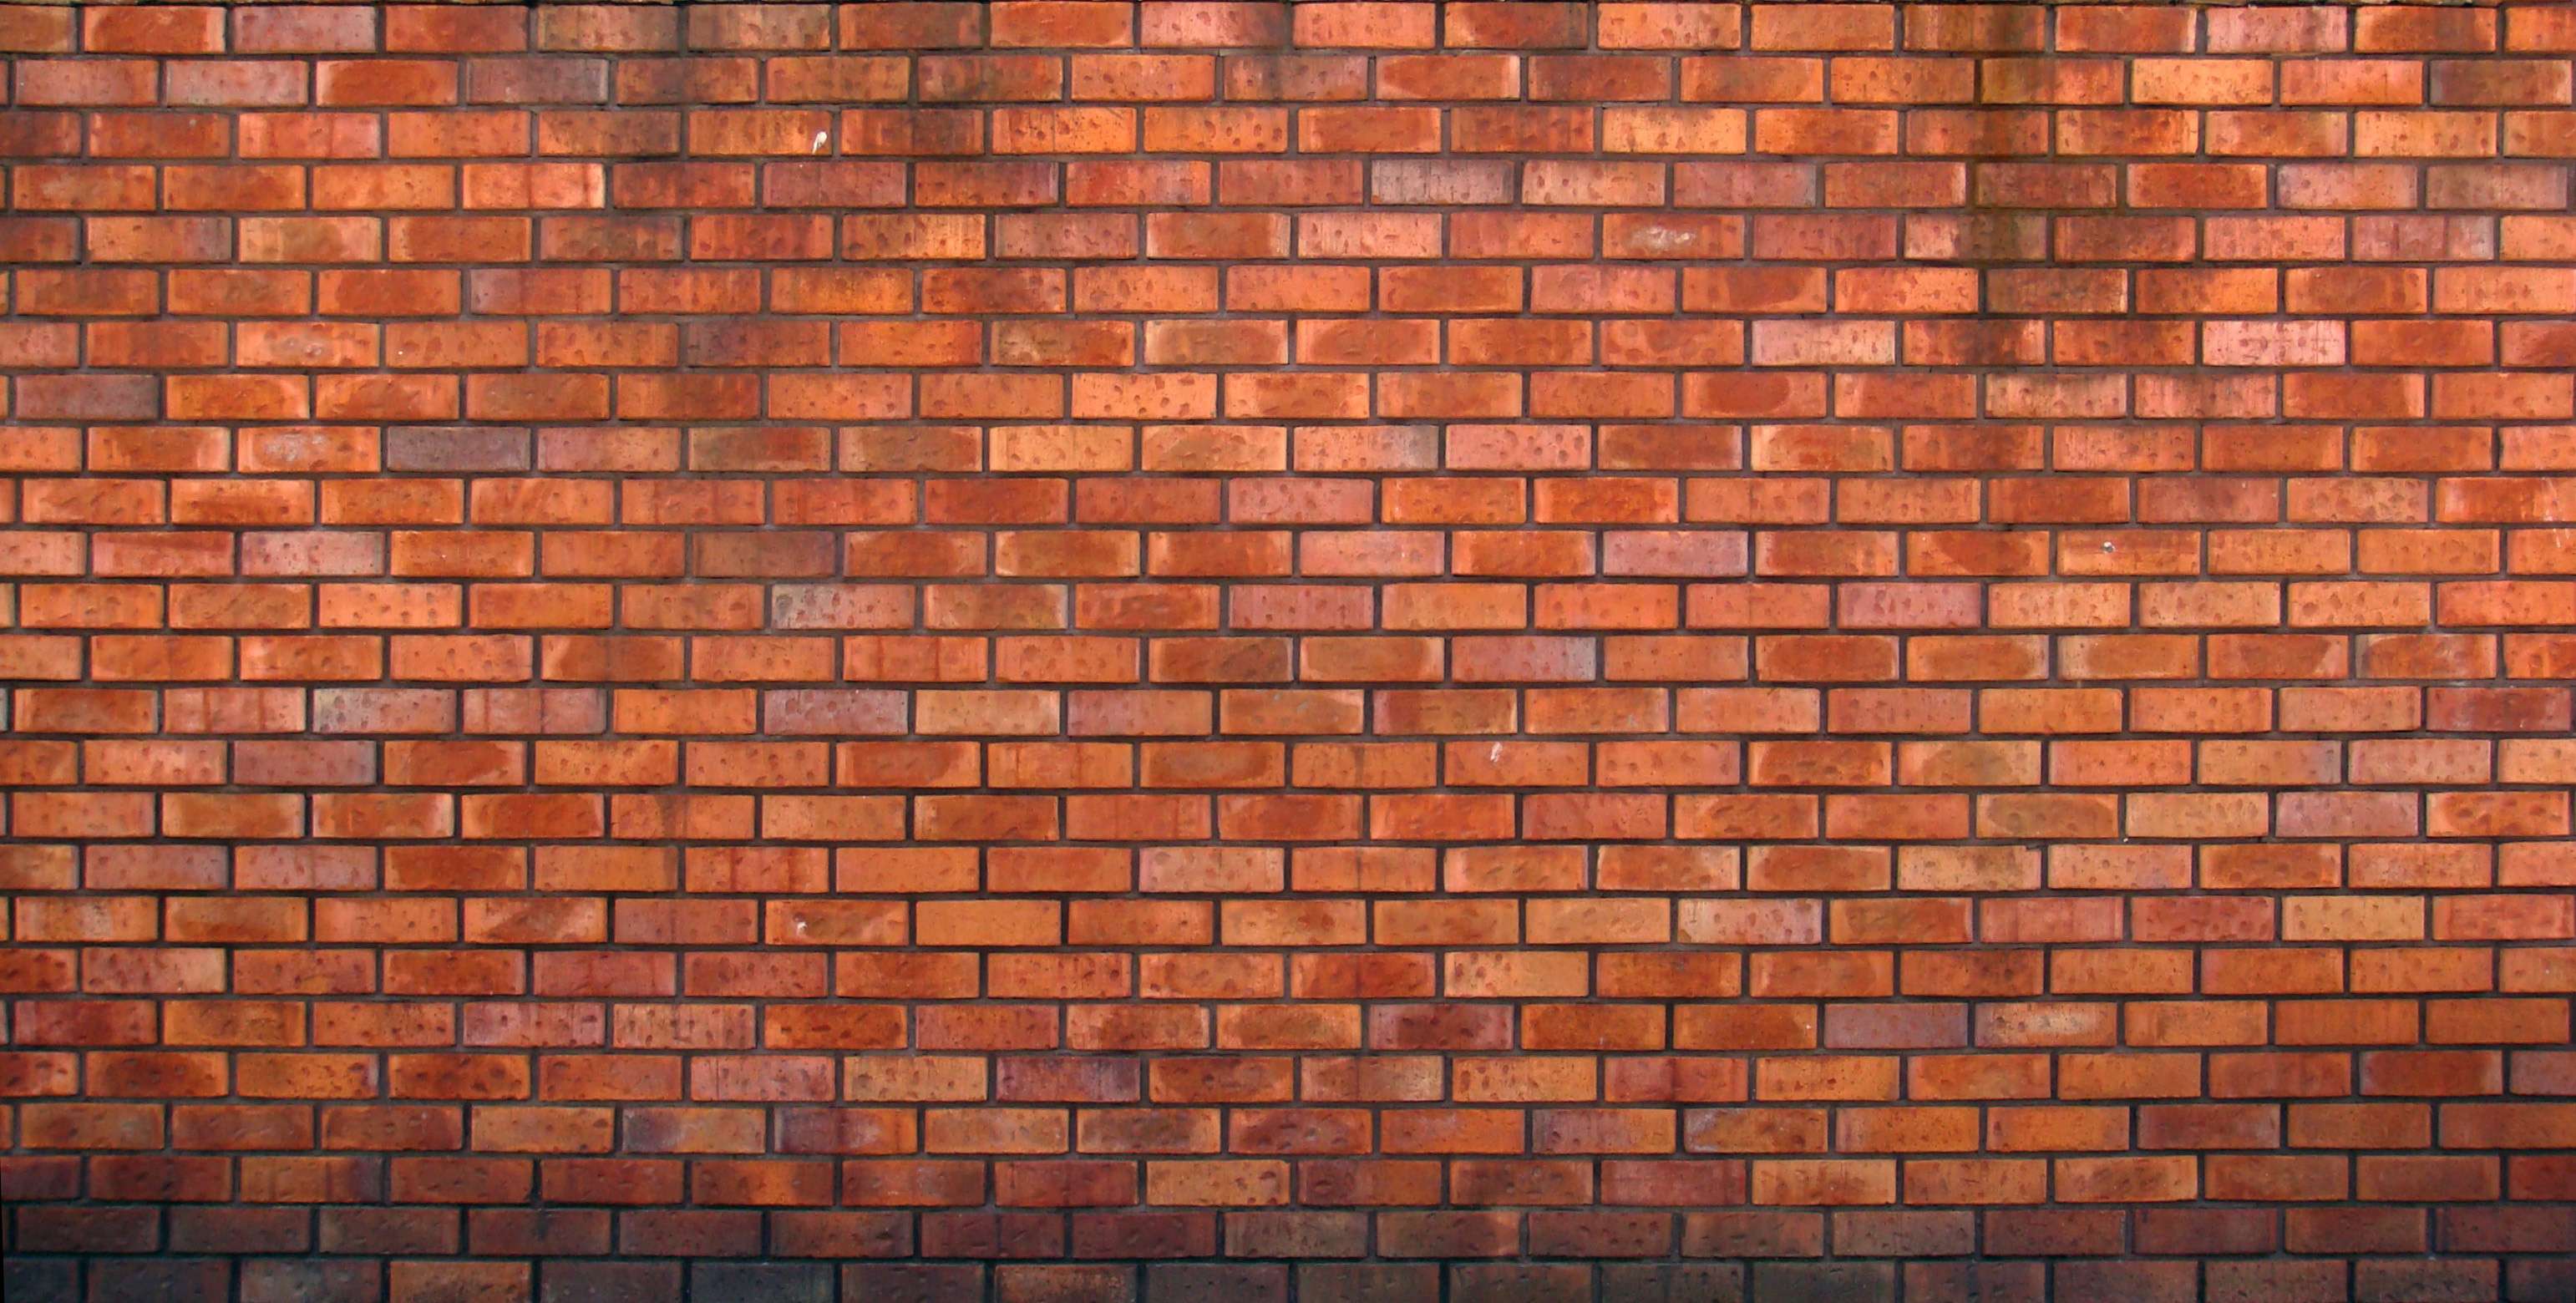 3084x1560 Brick Wall Pattern Hd Wallpapers Wide Free Clipgoo Background Forty Texture  And Walls Excerpt Design Interior Institute Online Des